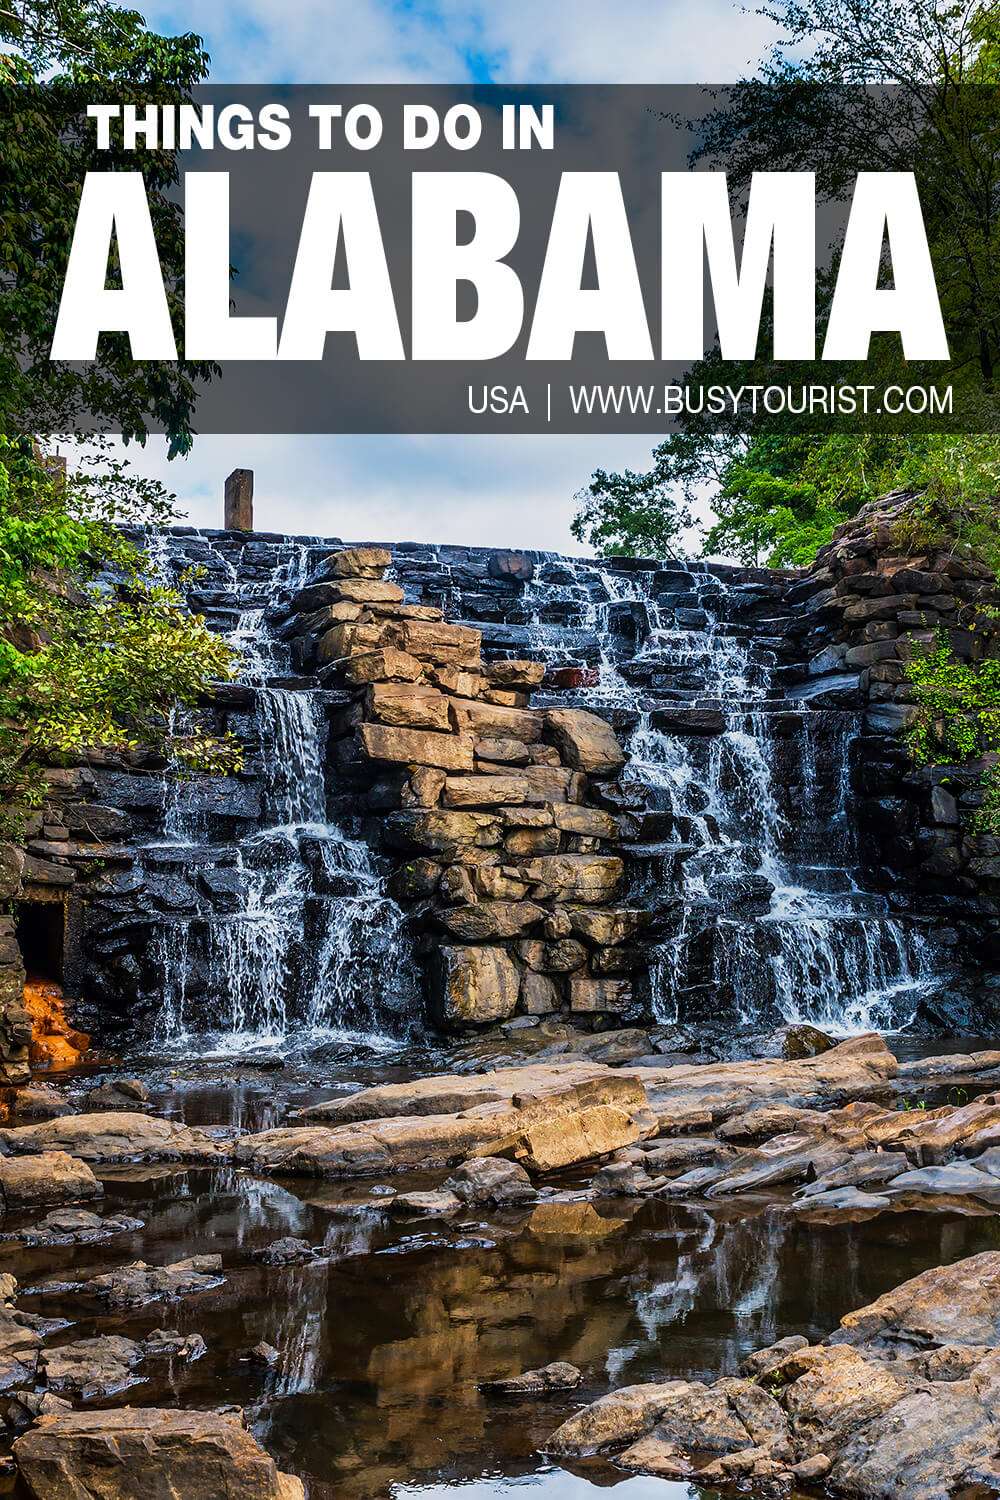 42 Fun Things To Do & Places To Visit In Alabama Attractions & Activities